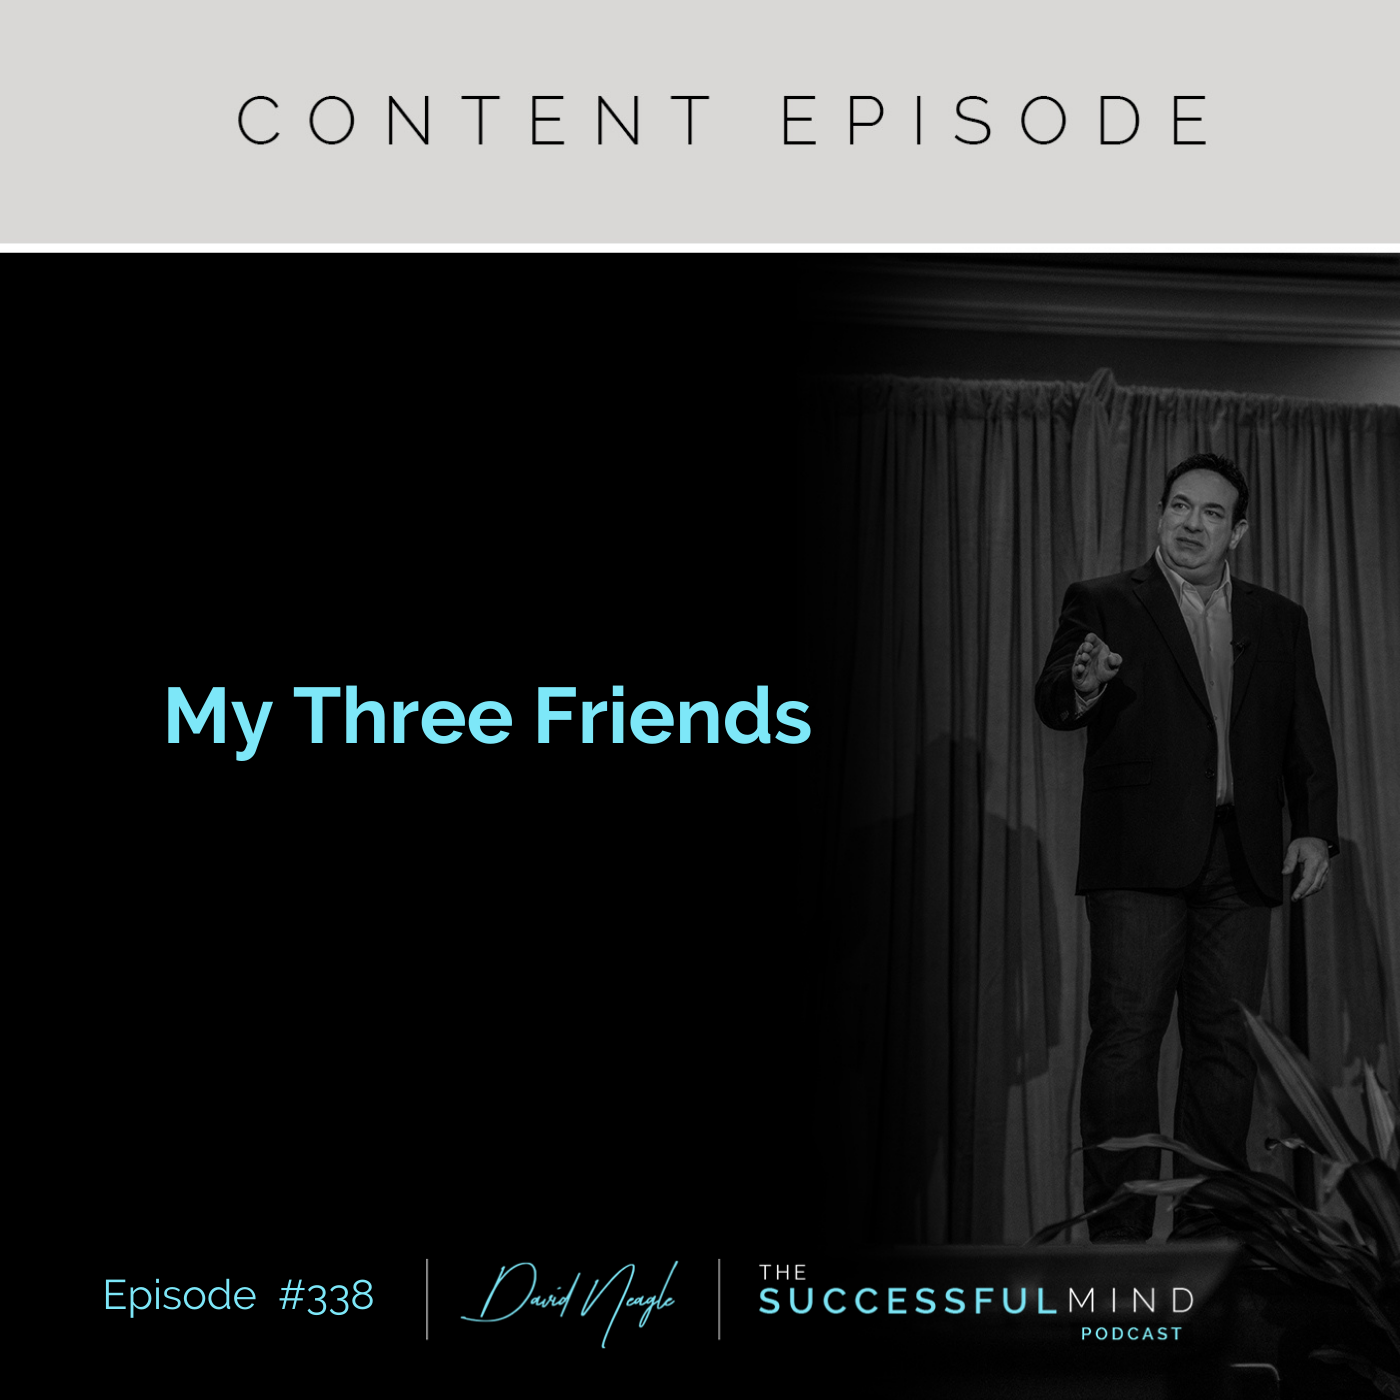 The Successful Mind Podcast - Episode 338 - My Three Friends